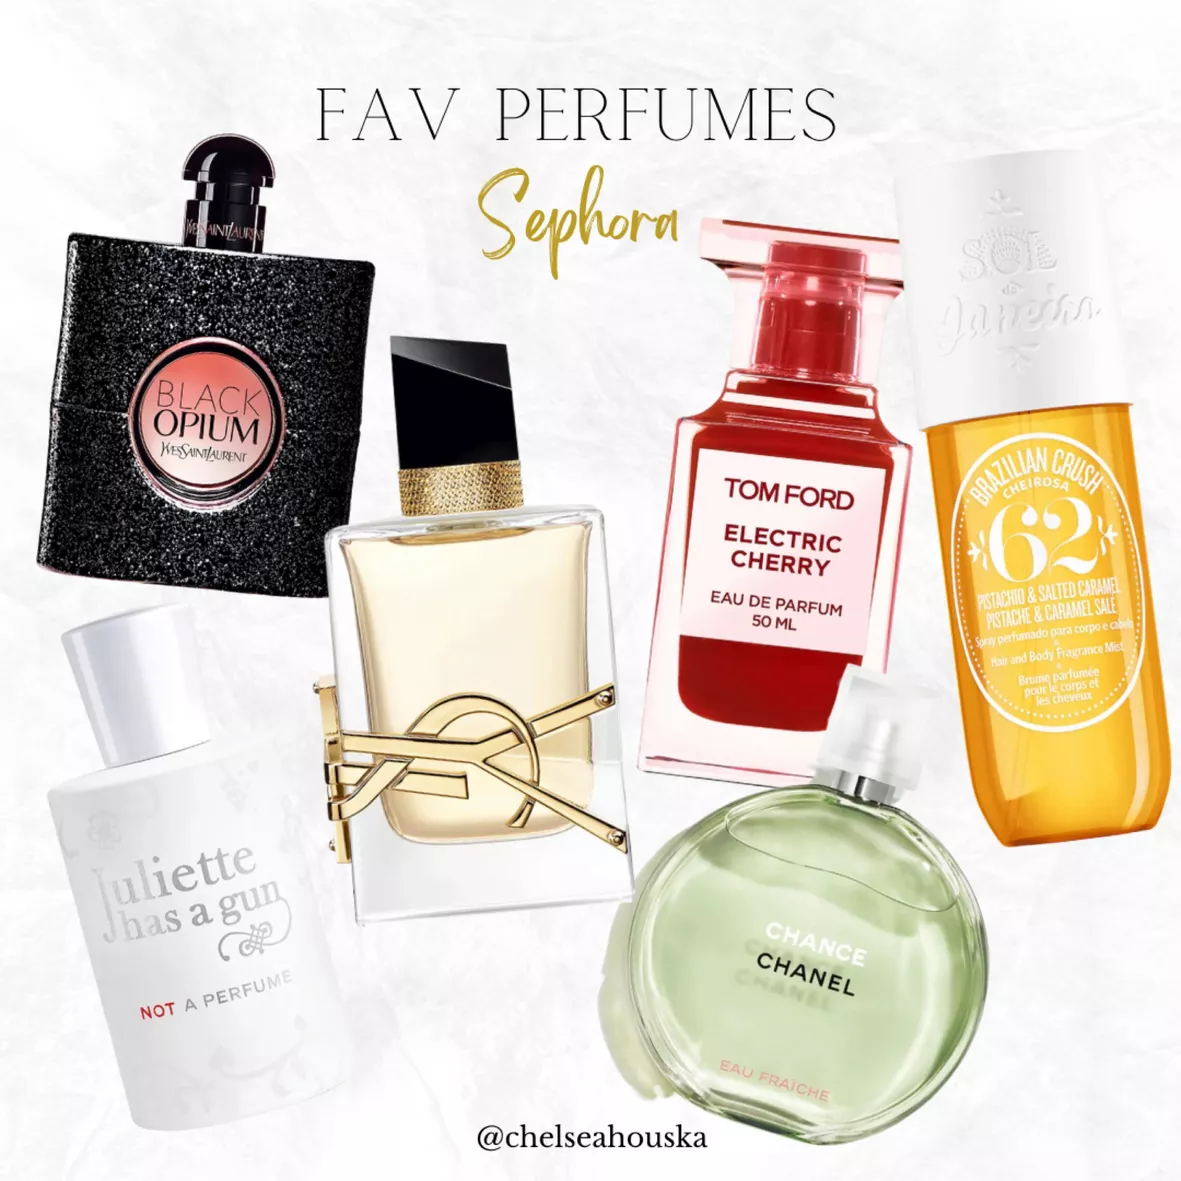 Sephora Perfume Sale – 10 Best Fragrance Deals to Save 20% Off